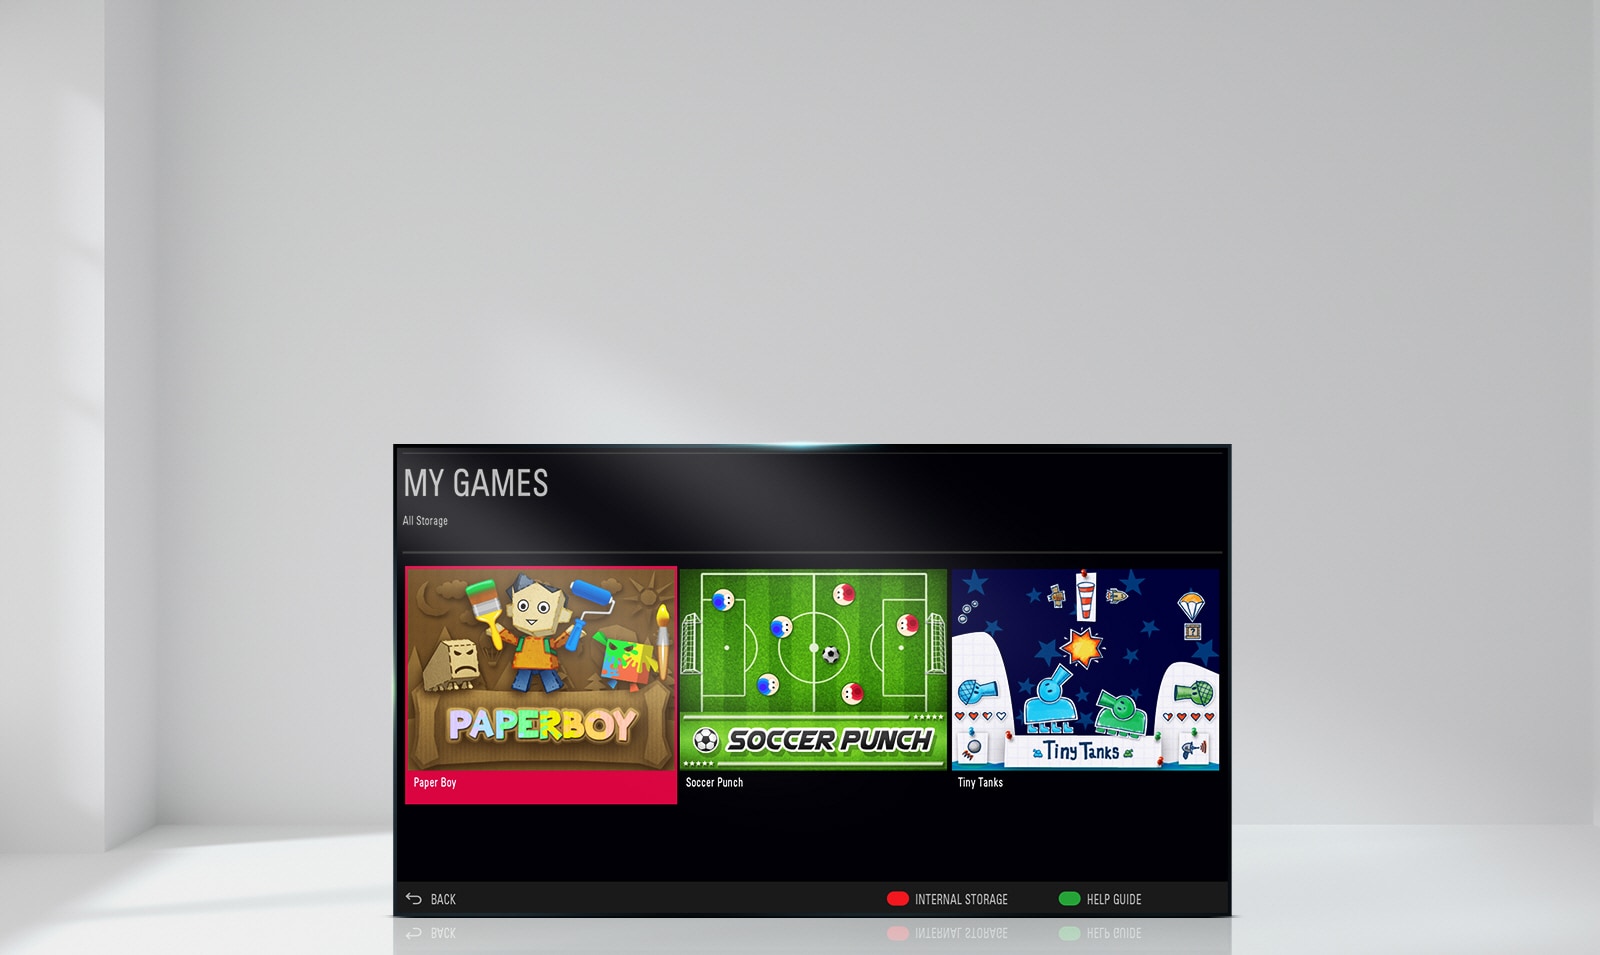 Built-in Games make anytime more entertainment